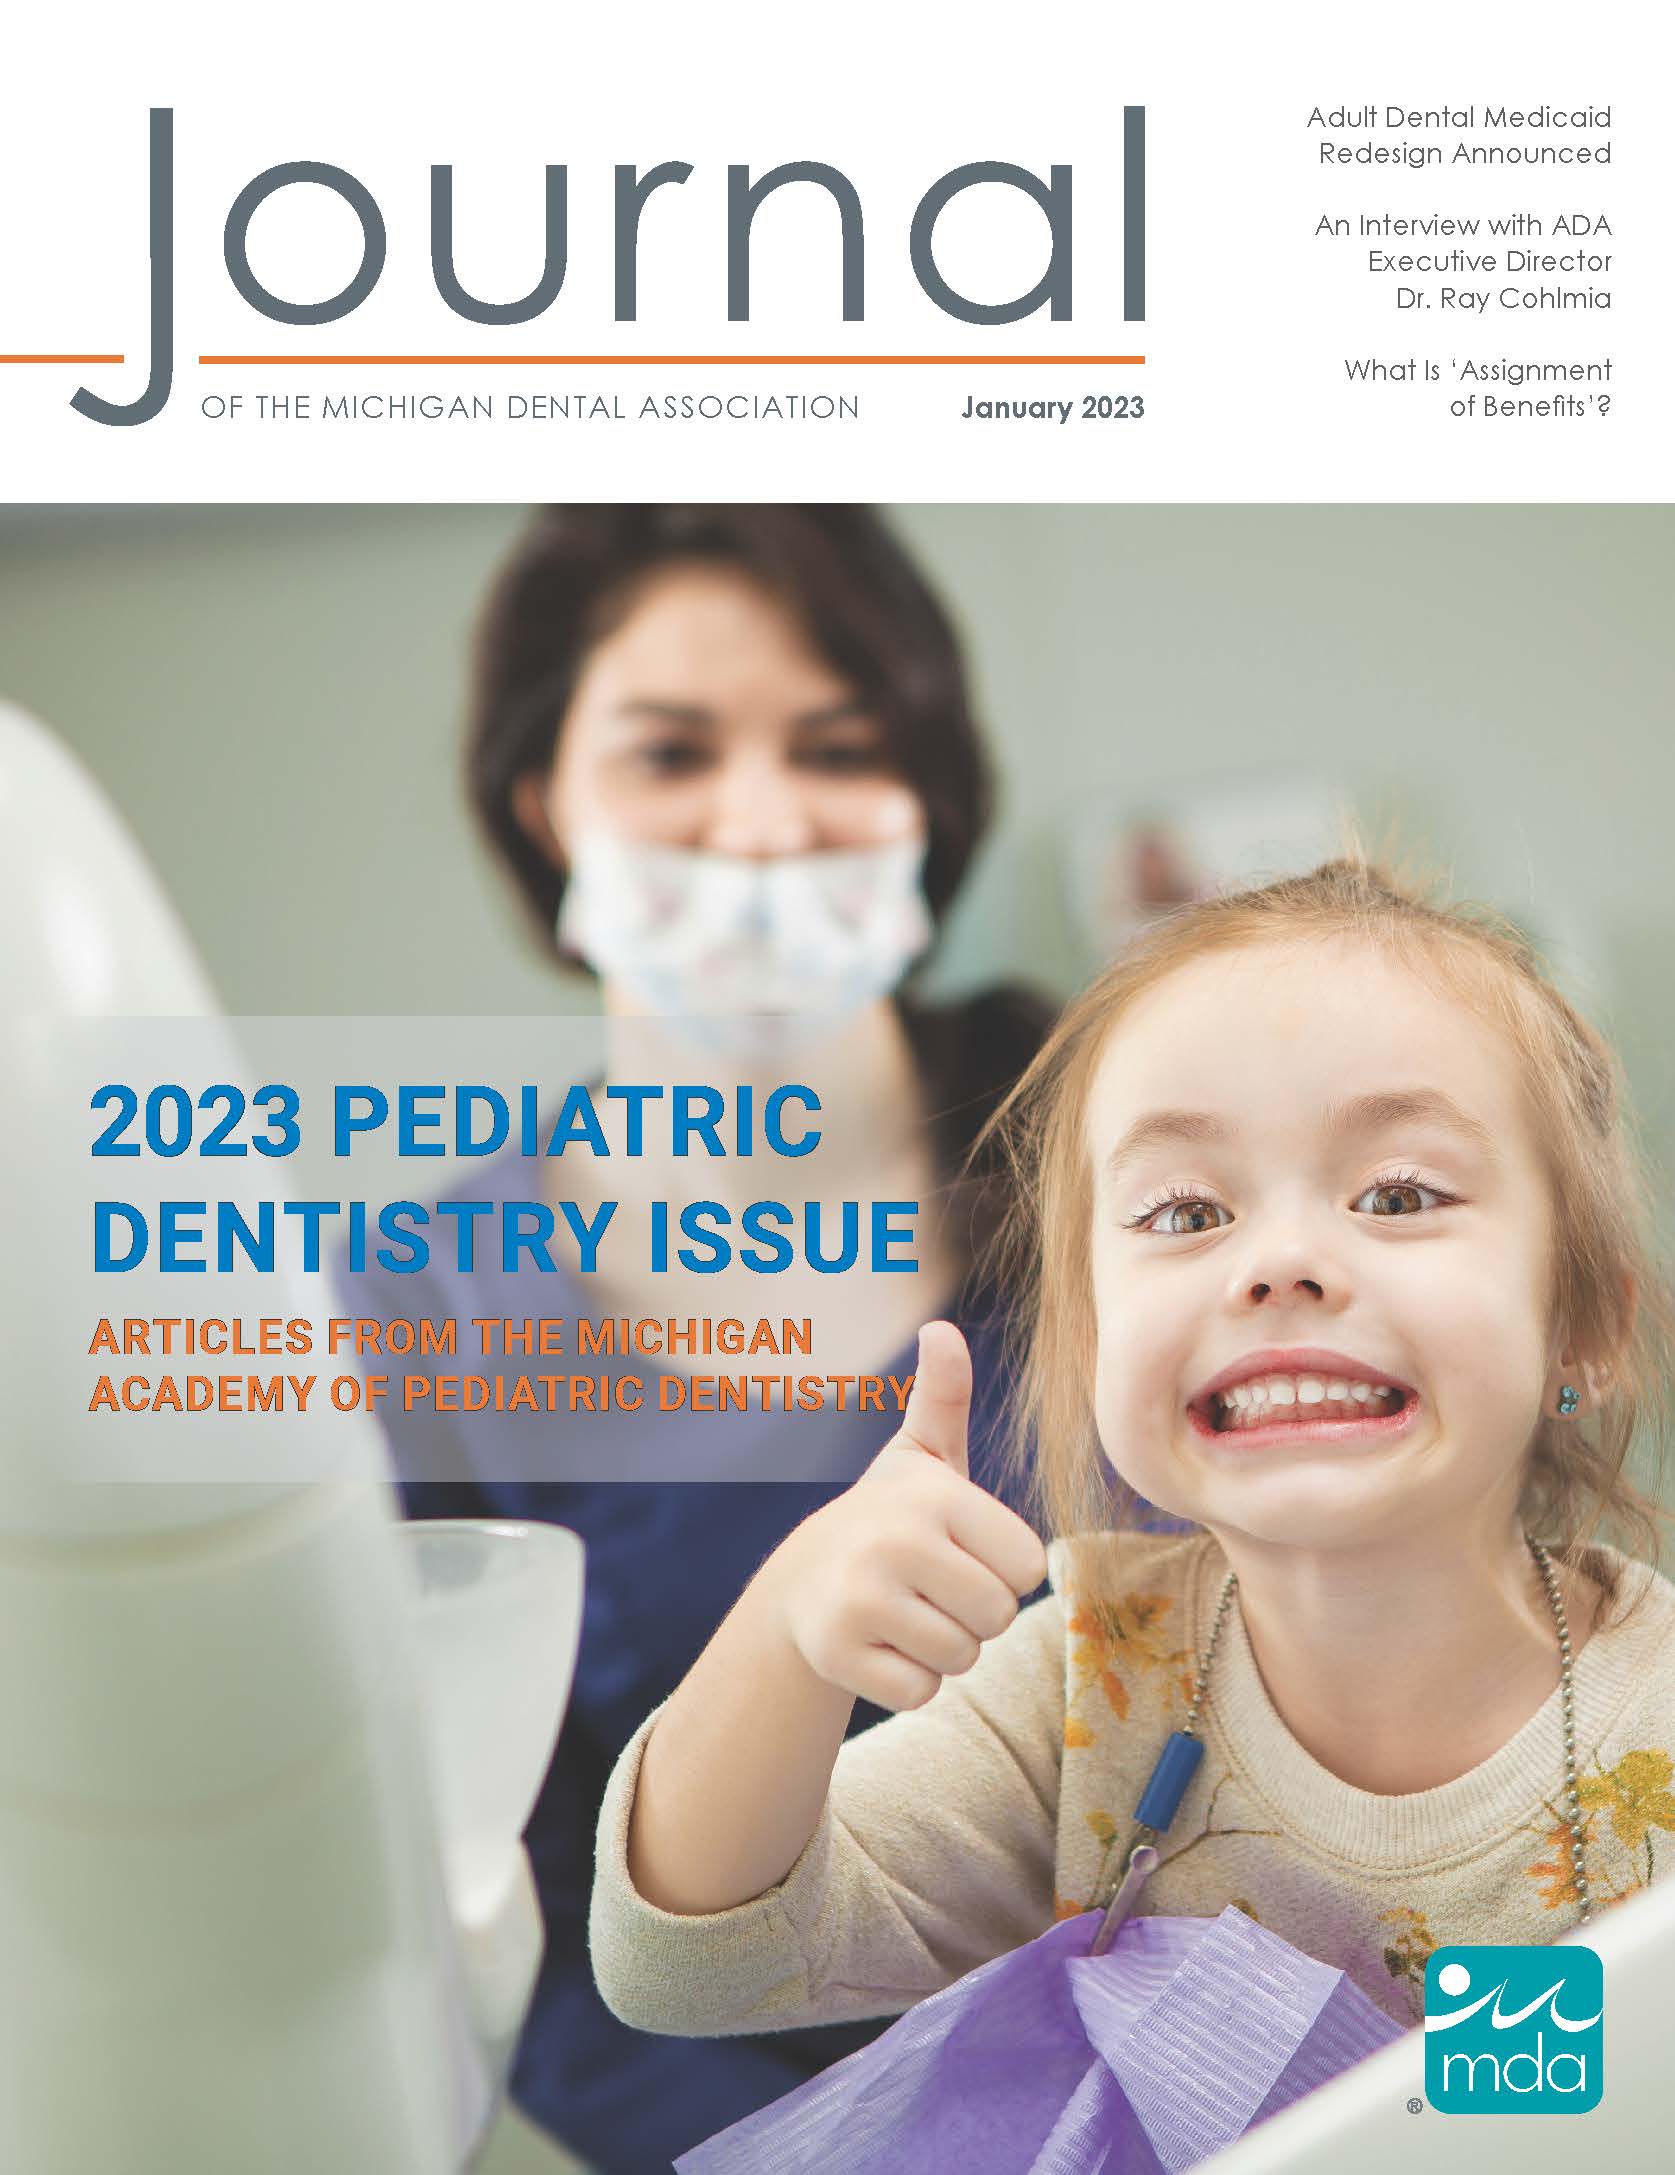 Cover of the Journal of the Michigan Dental Association featuring a small child with a dental exam bib around their neck grinning widely and giving a thumbs up. A person in scrubs with a facemask looks on in the background.